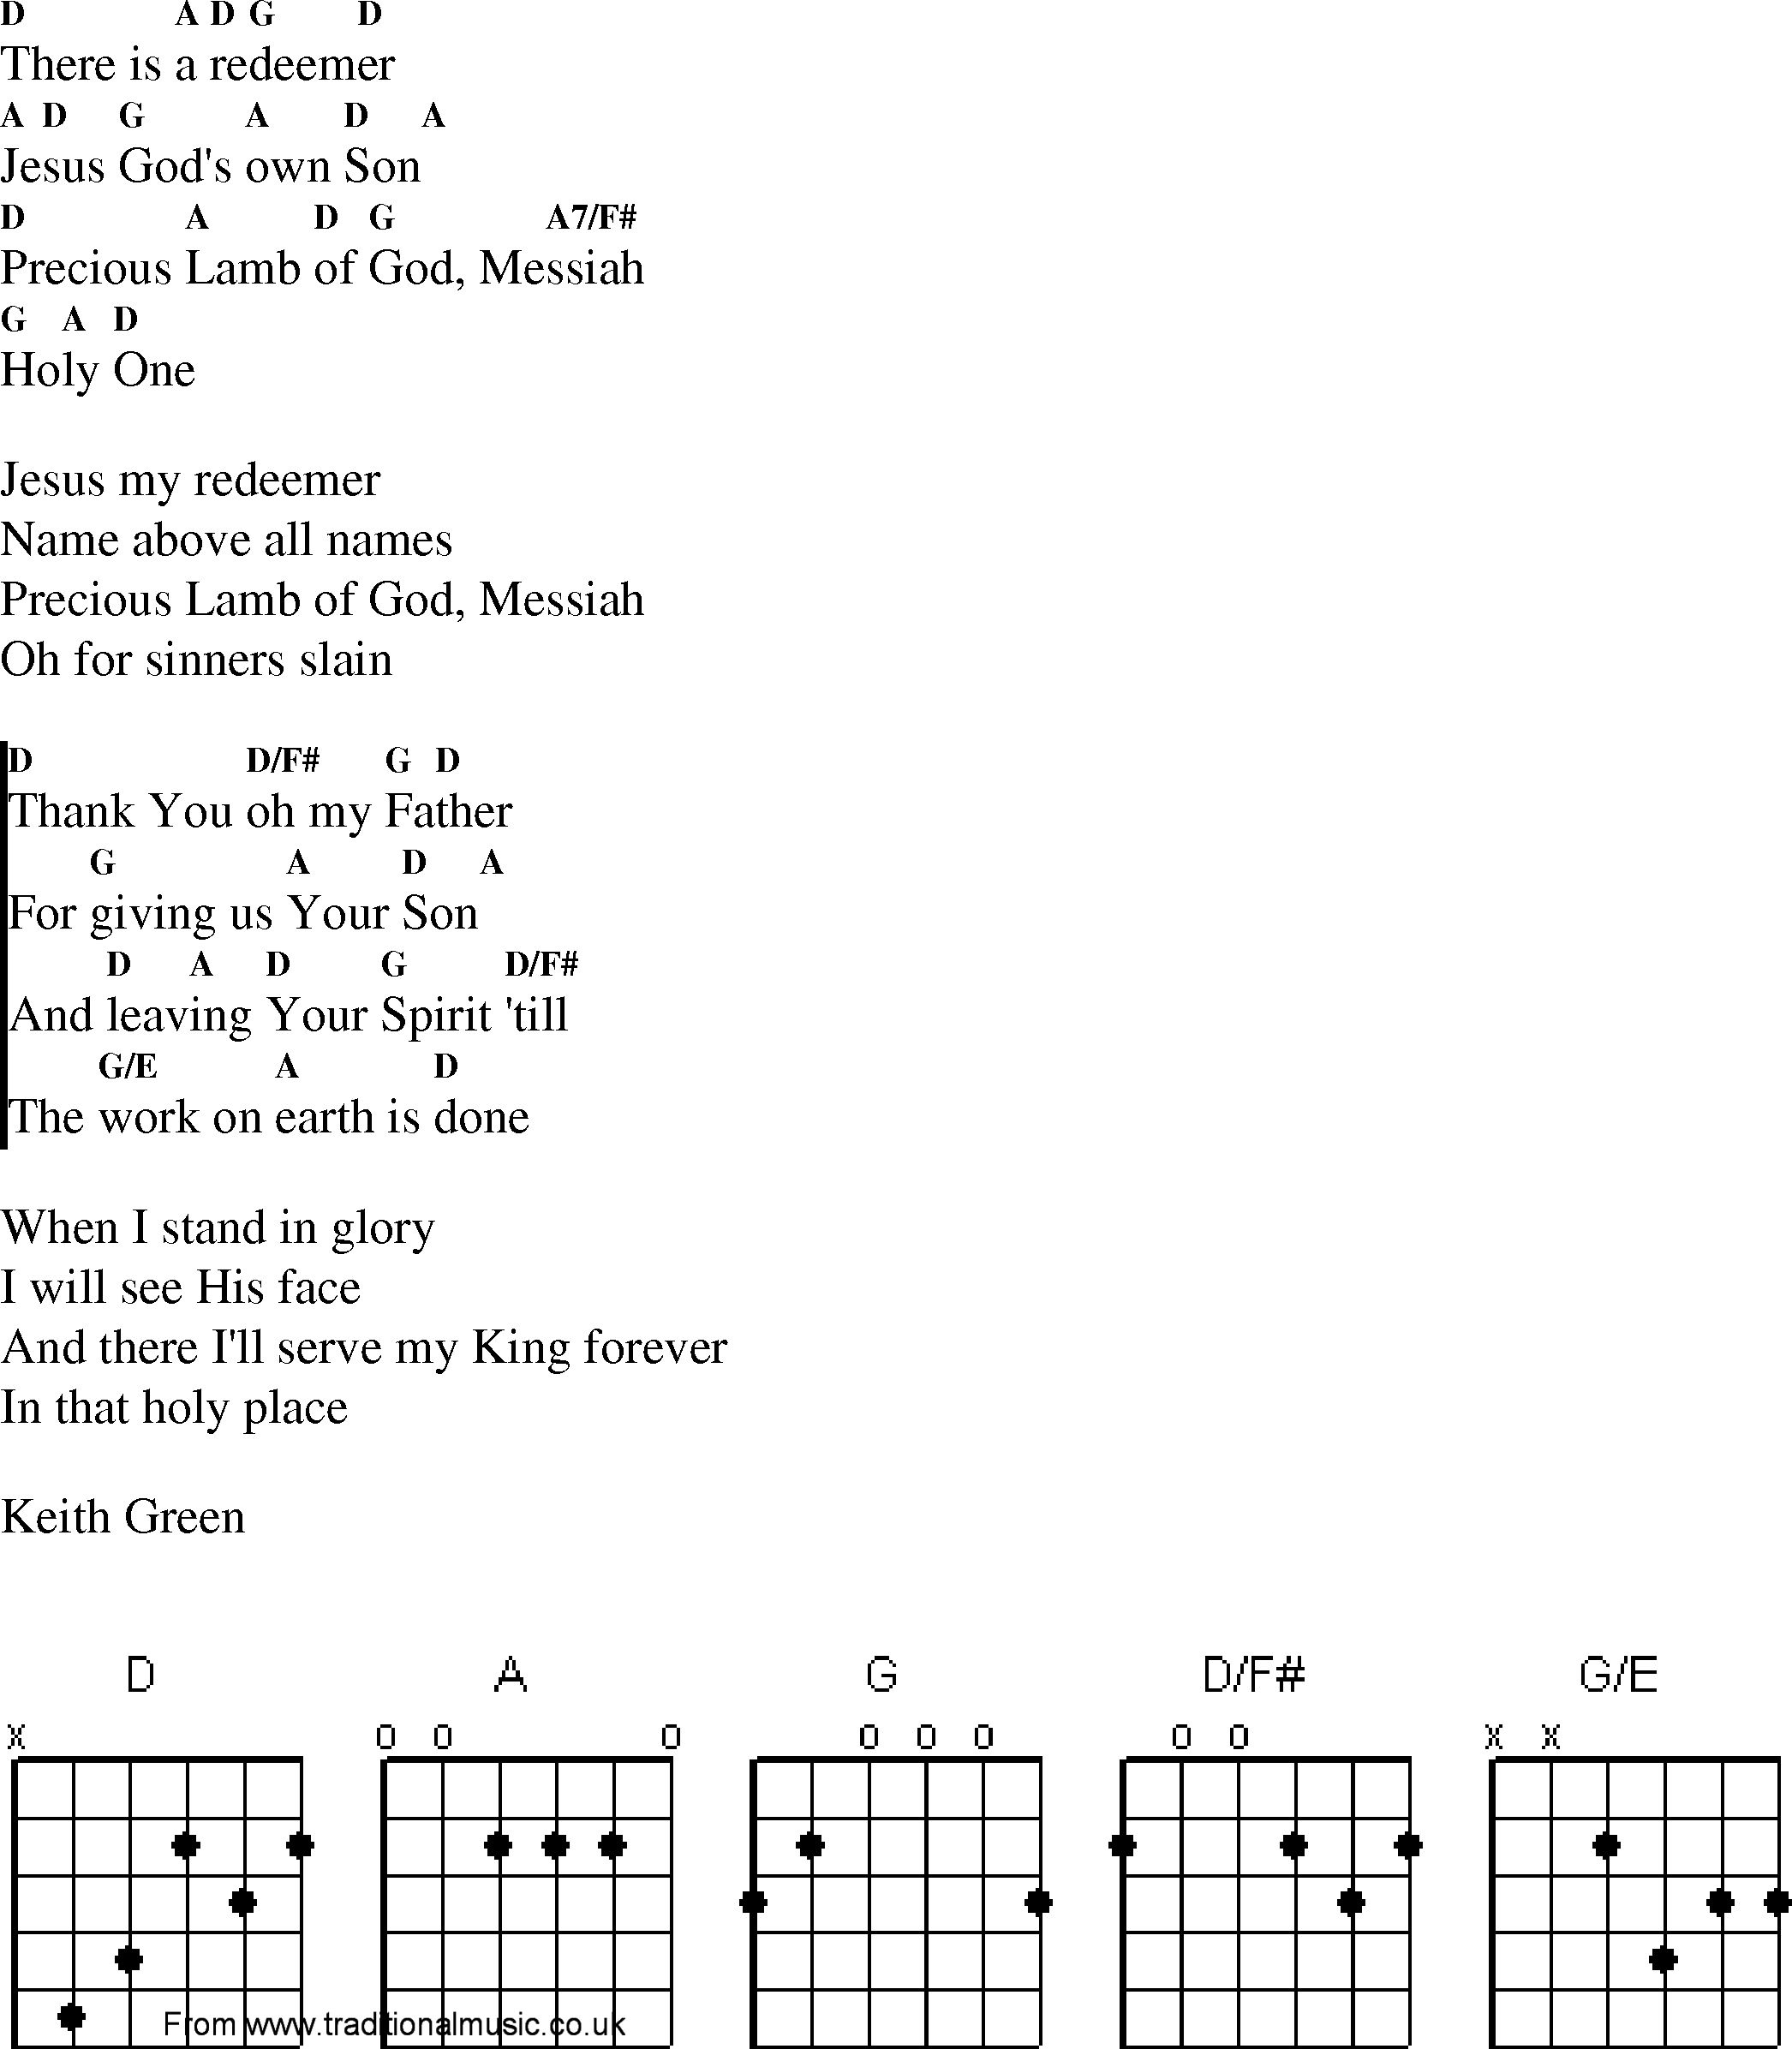 Gospel Song: there_is_a_redeemer, lyrics and chords.